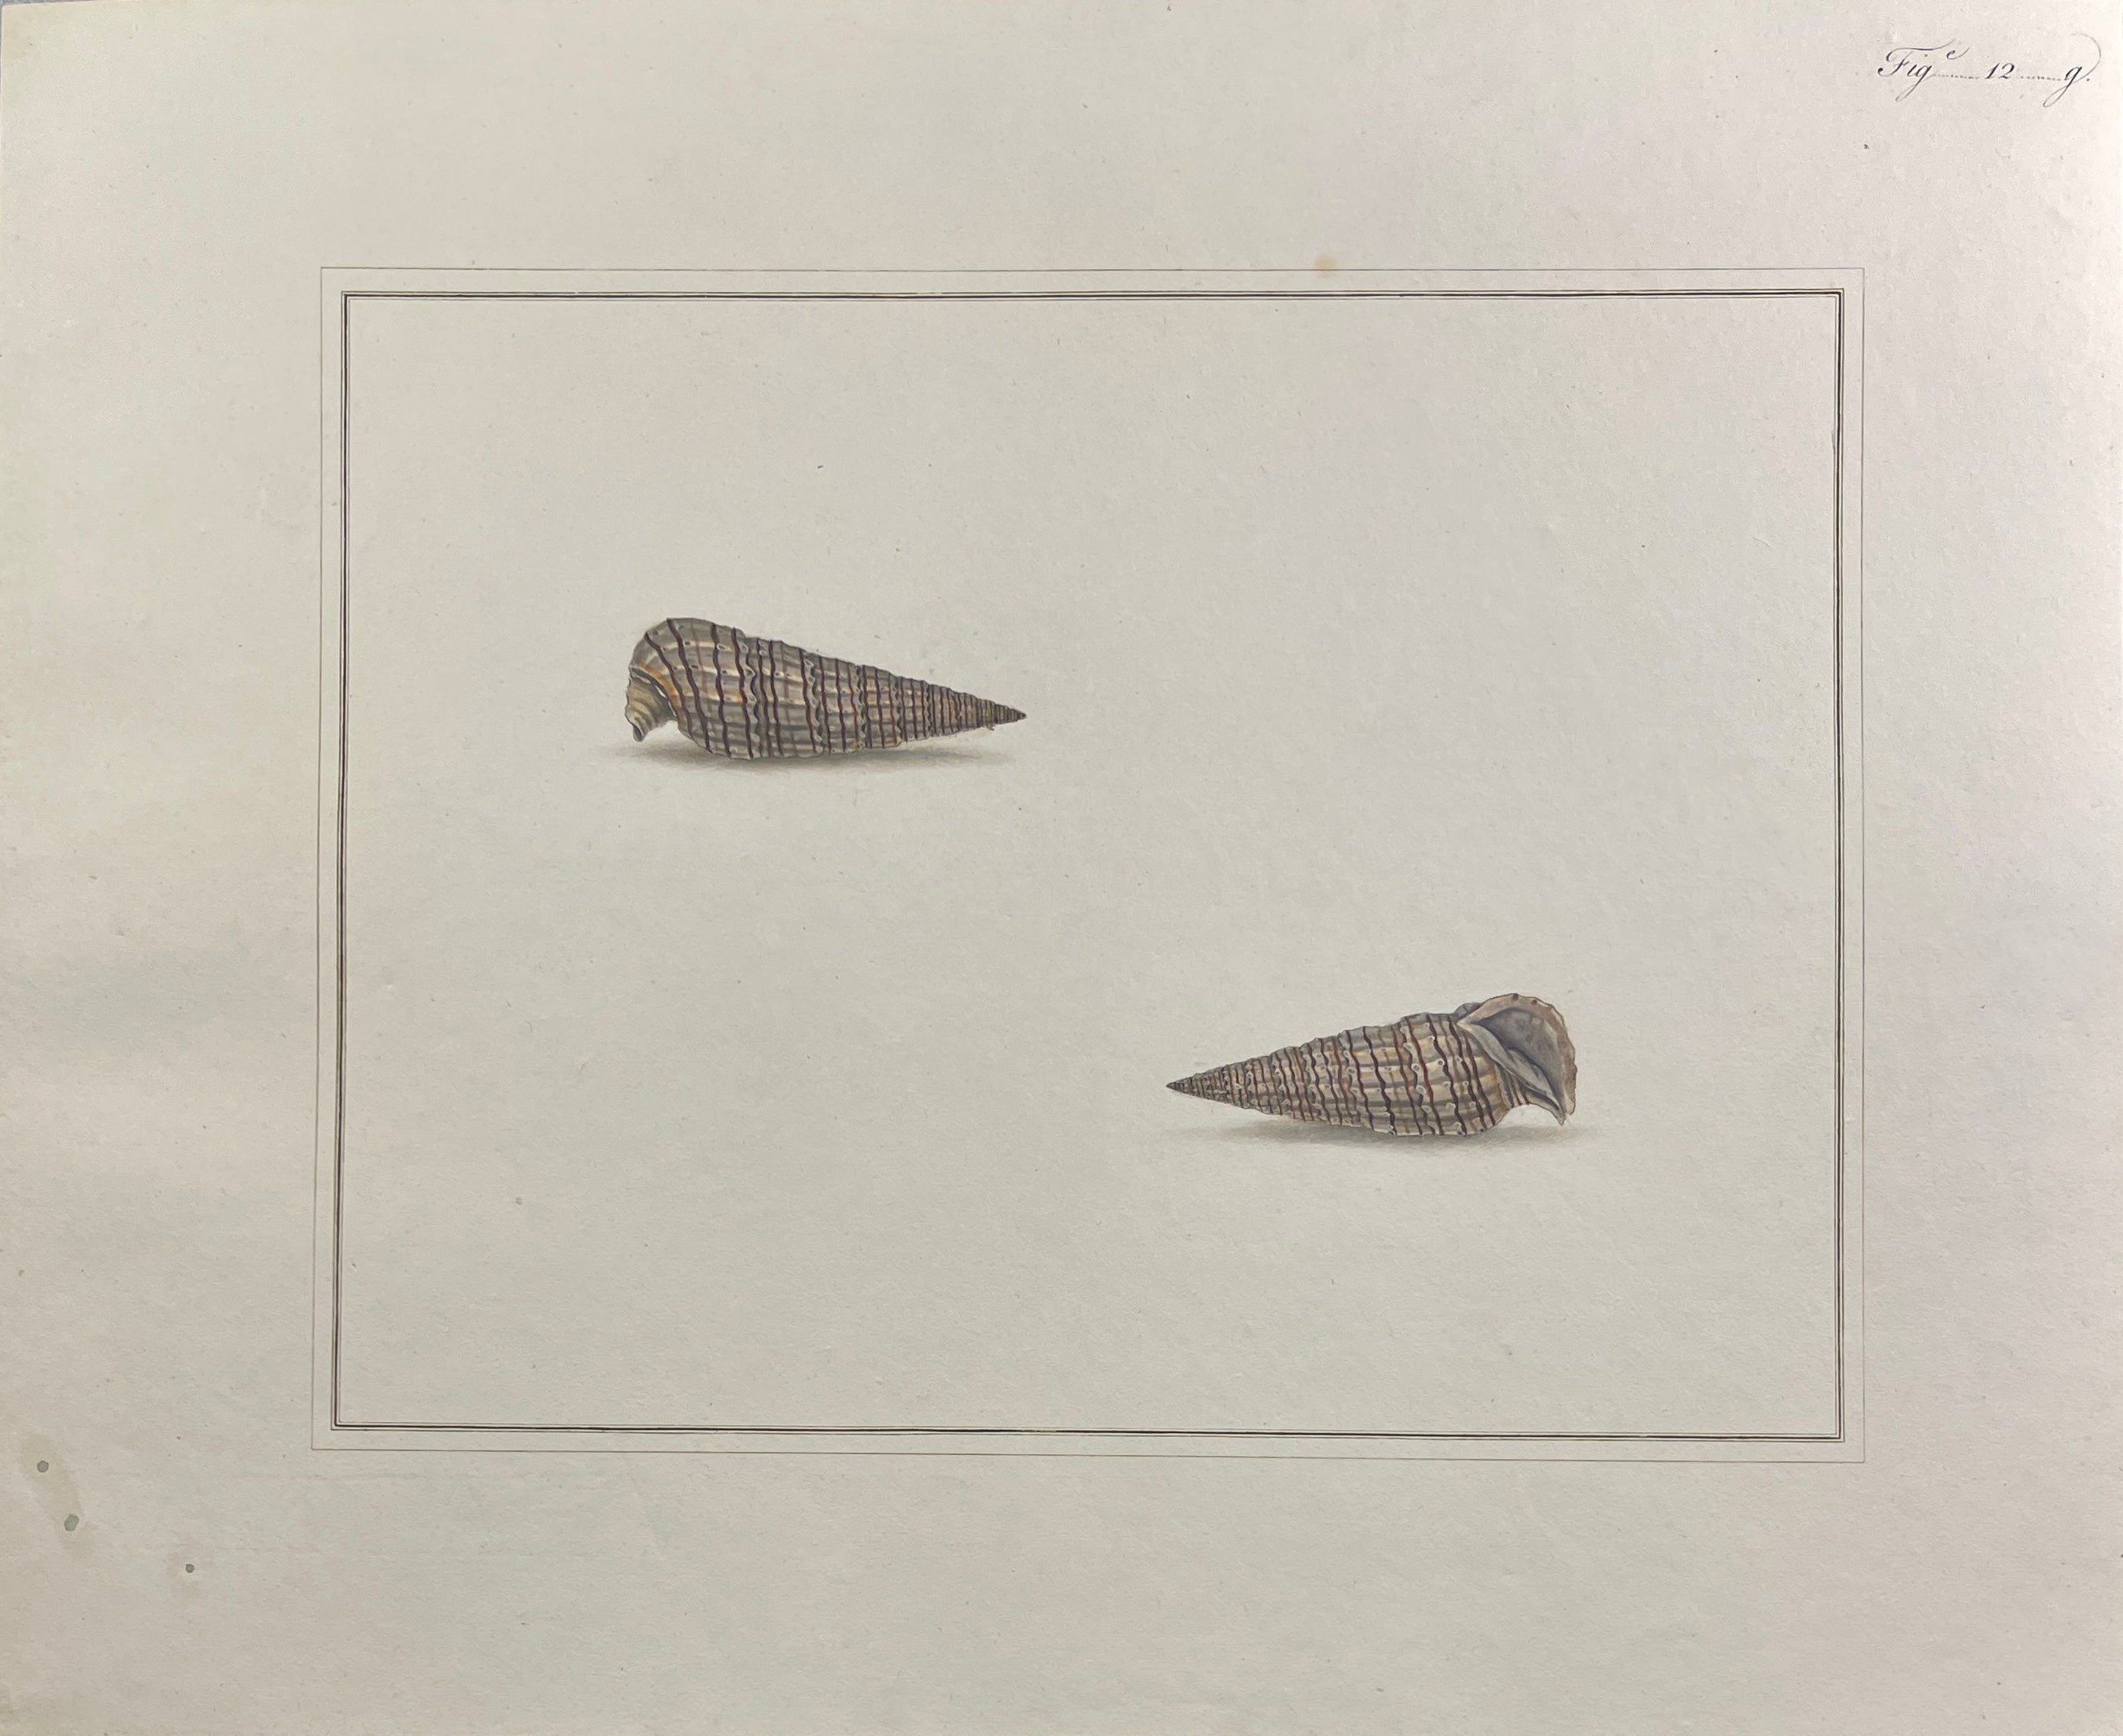 Thomas Martyn 1784 Original Crinkled Club Shell Print Plate 12 - Found at Friendly Isles - Hand-Colored Tipped-In Engraving at Adirondack Retro